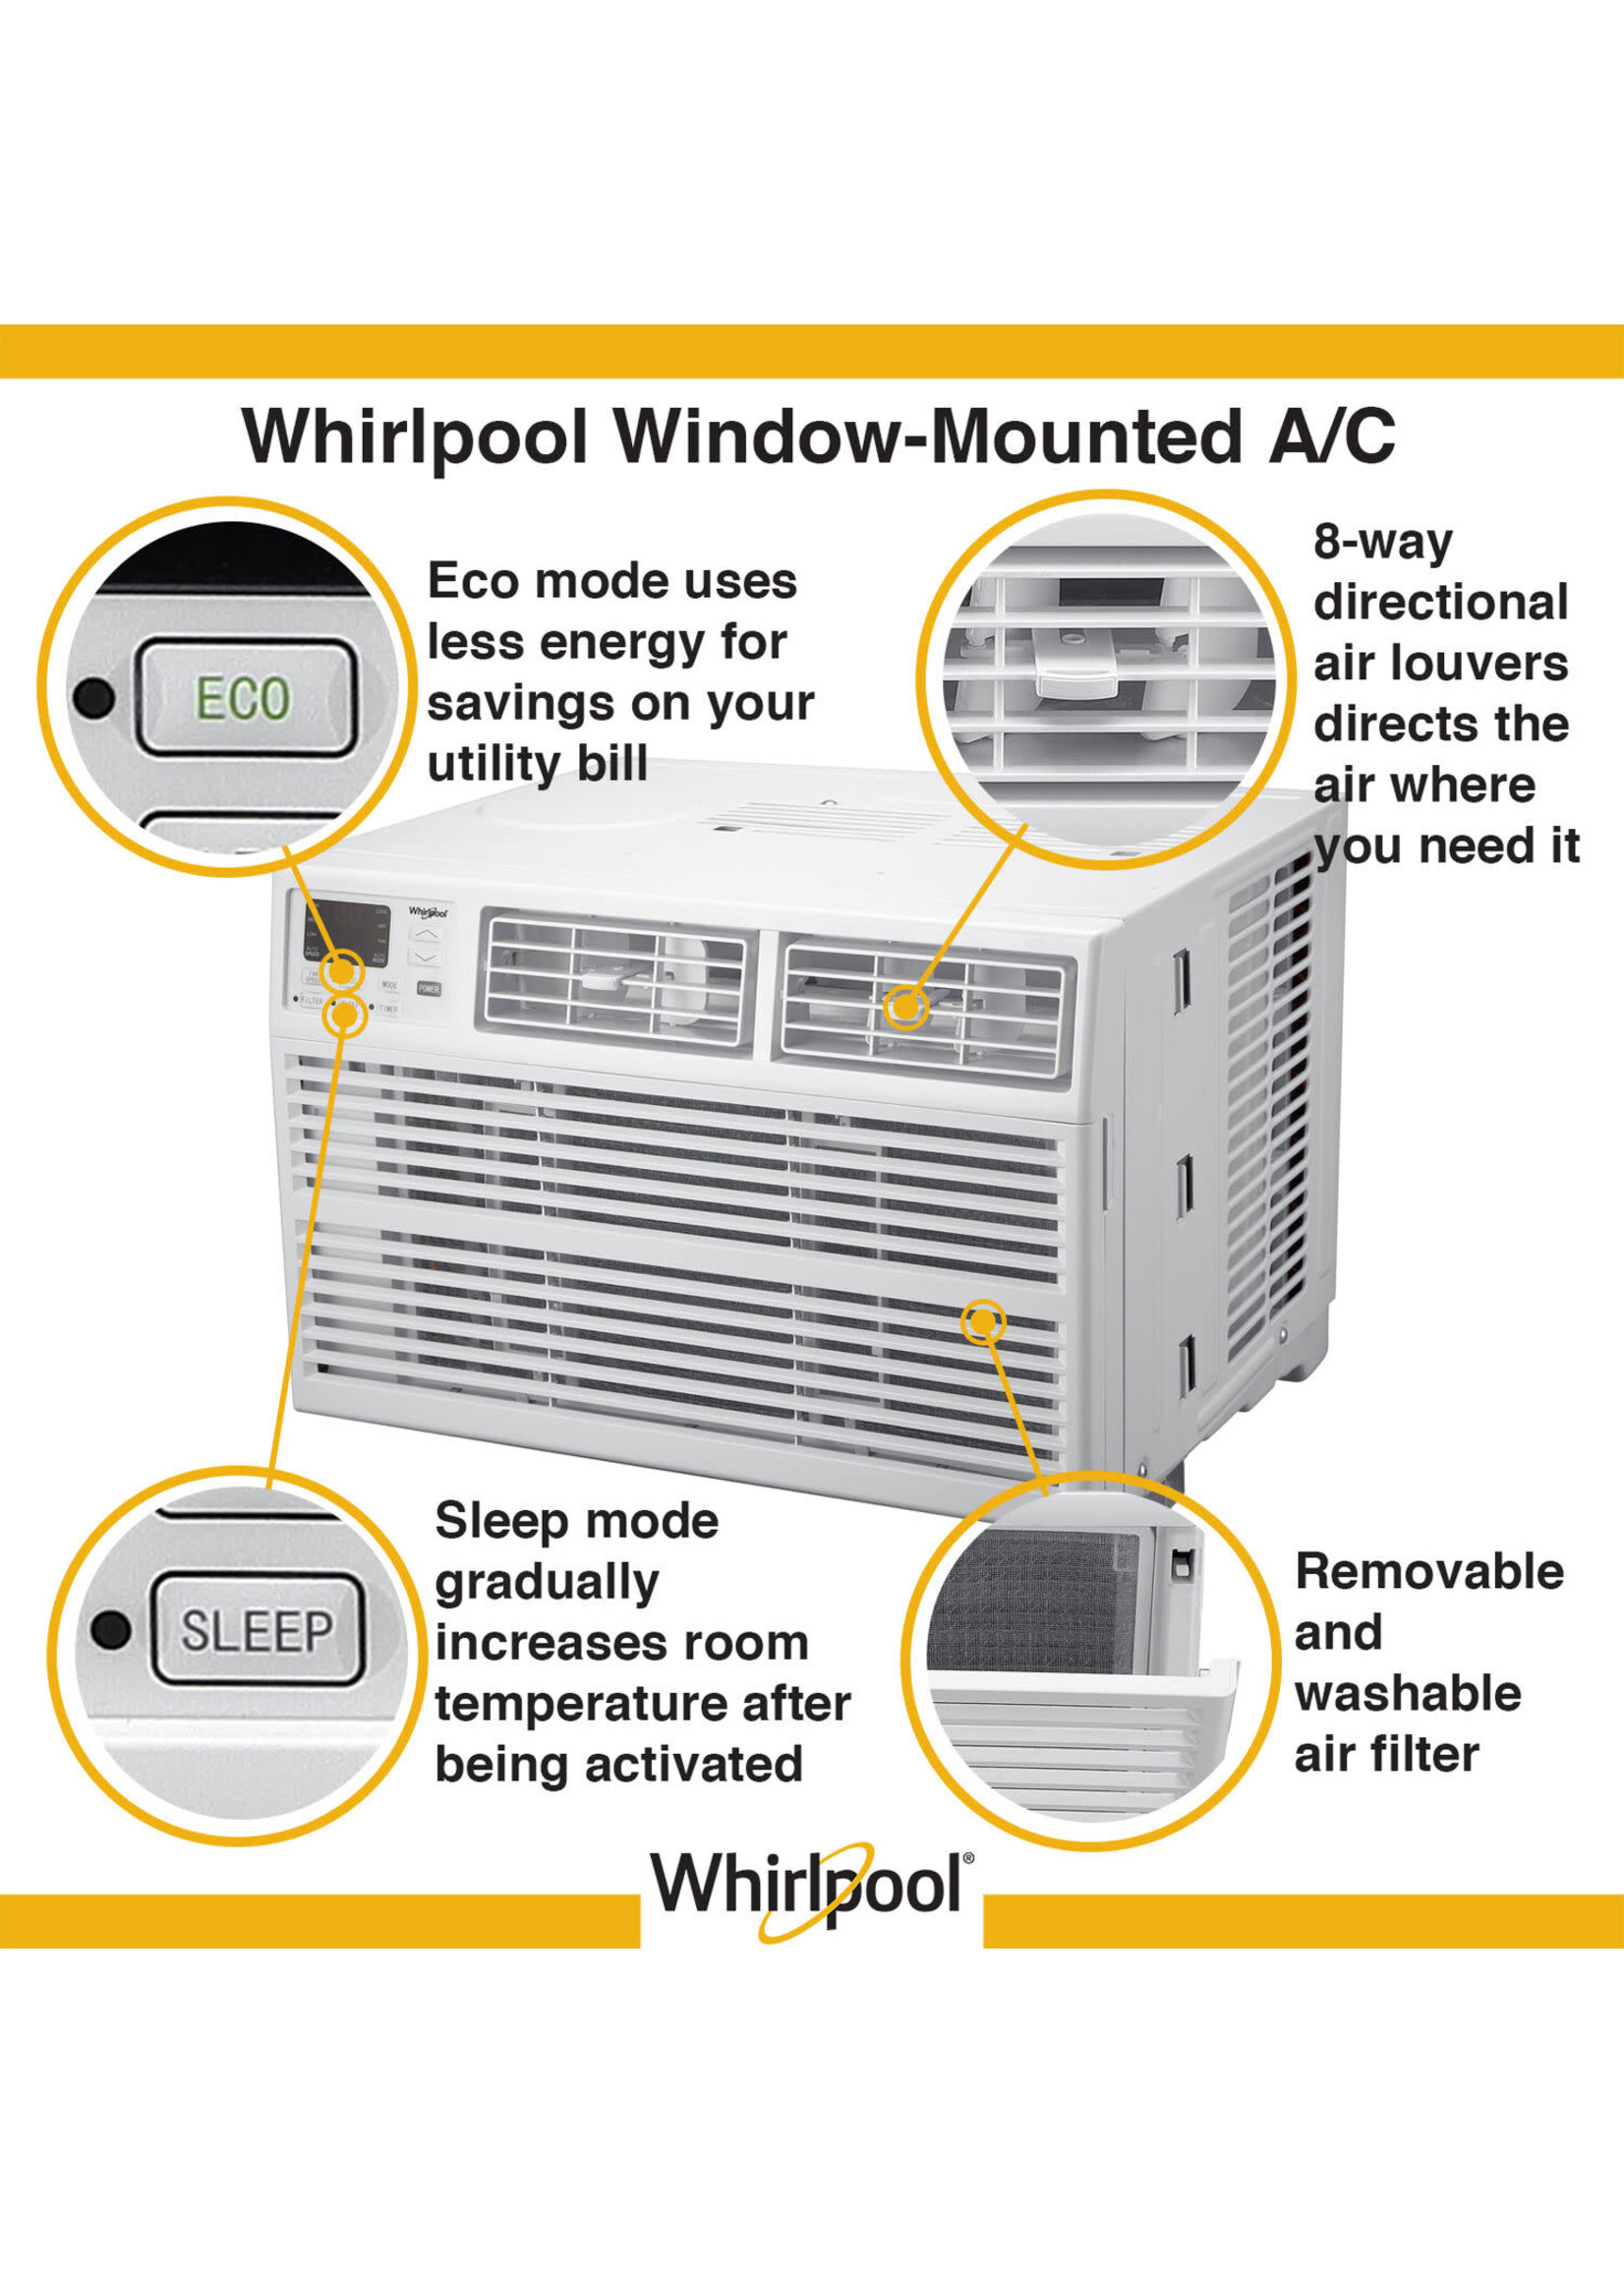 Whirlpool ENERGY STAR 18,000 BTU 230V WINDOW-MOUNTED AIR CONDITIONER WITH HEAT